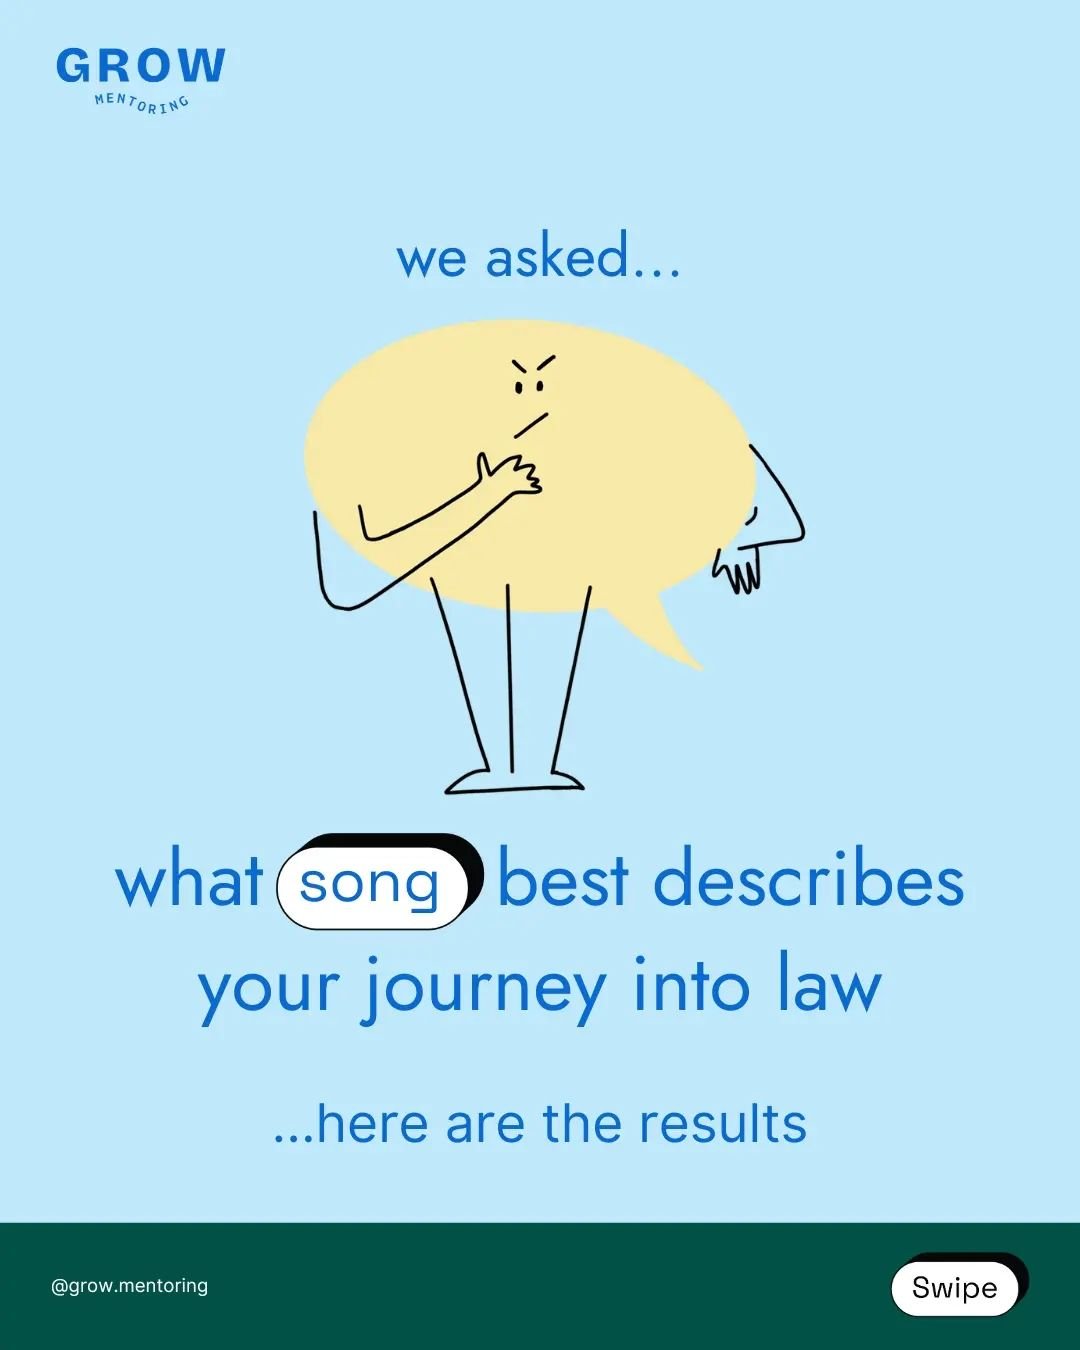 🎶 Music to describe your journey into law

We asked - you answered!

Have a look at some of the songs our community picked out to describe their experience and thoughts about pursuing a career in law. Our mission is to empower the next generation of